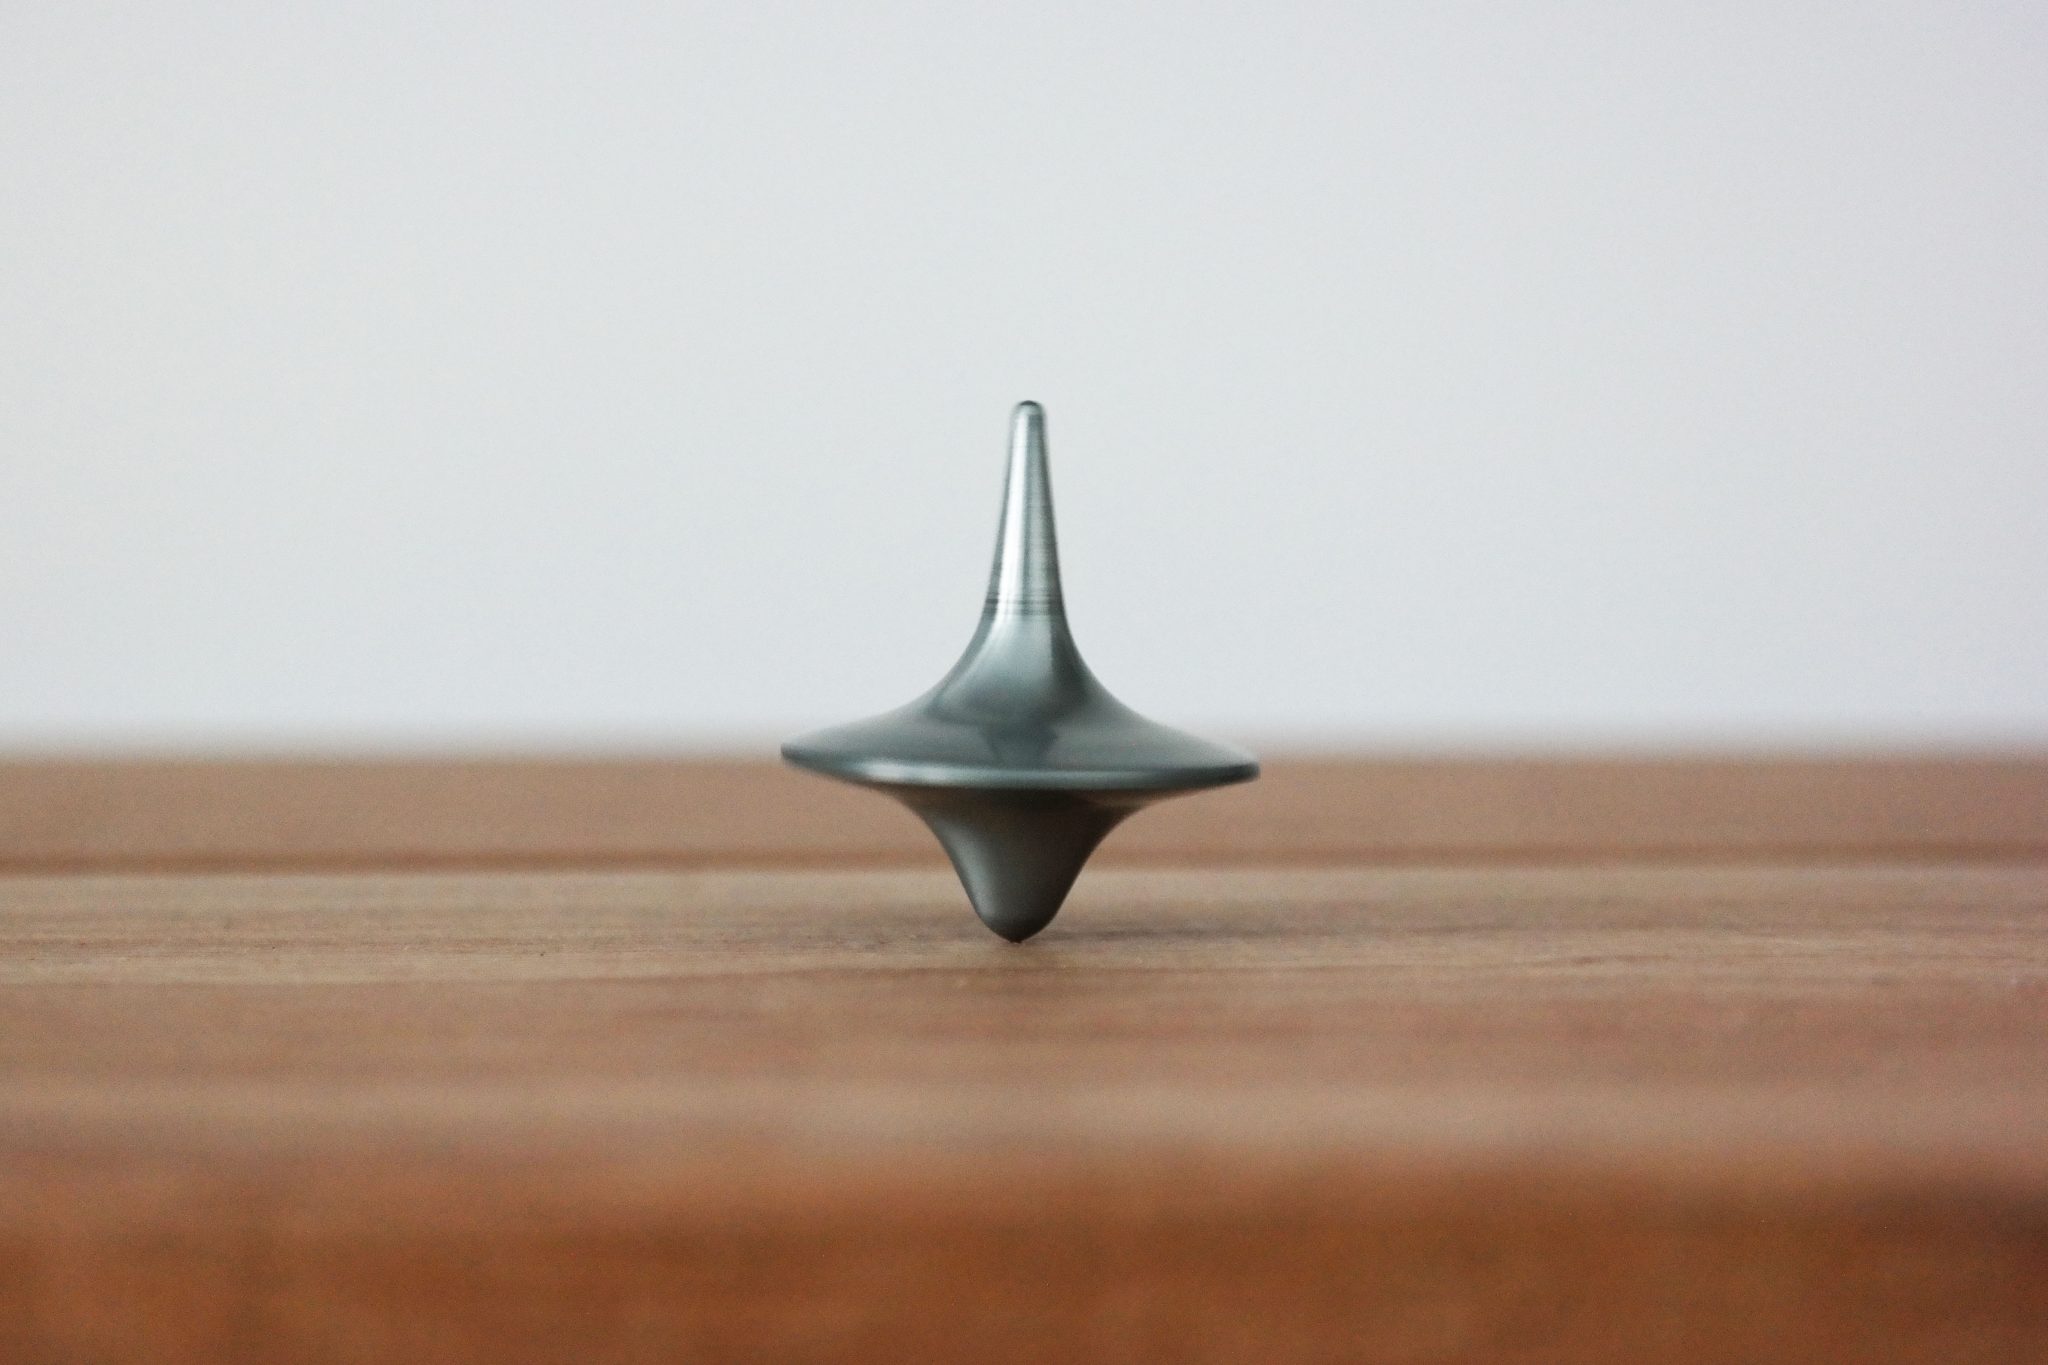 Image of a spinning top